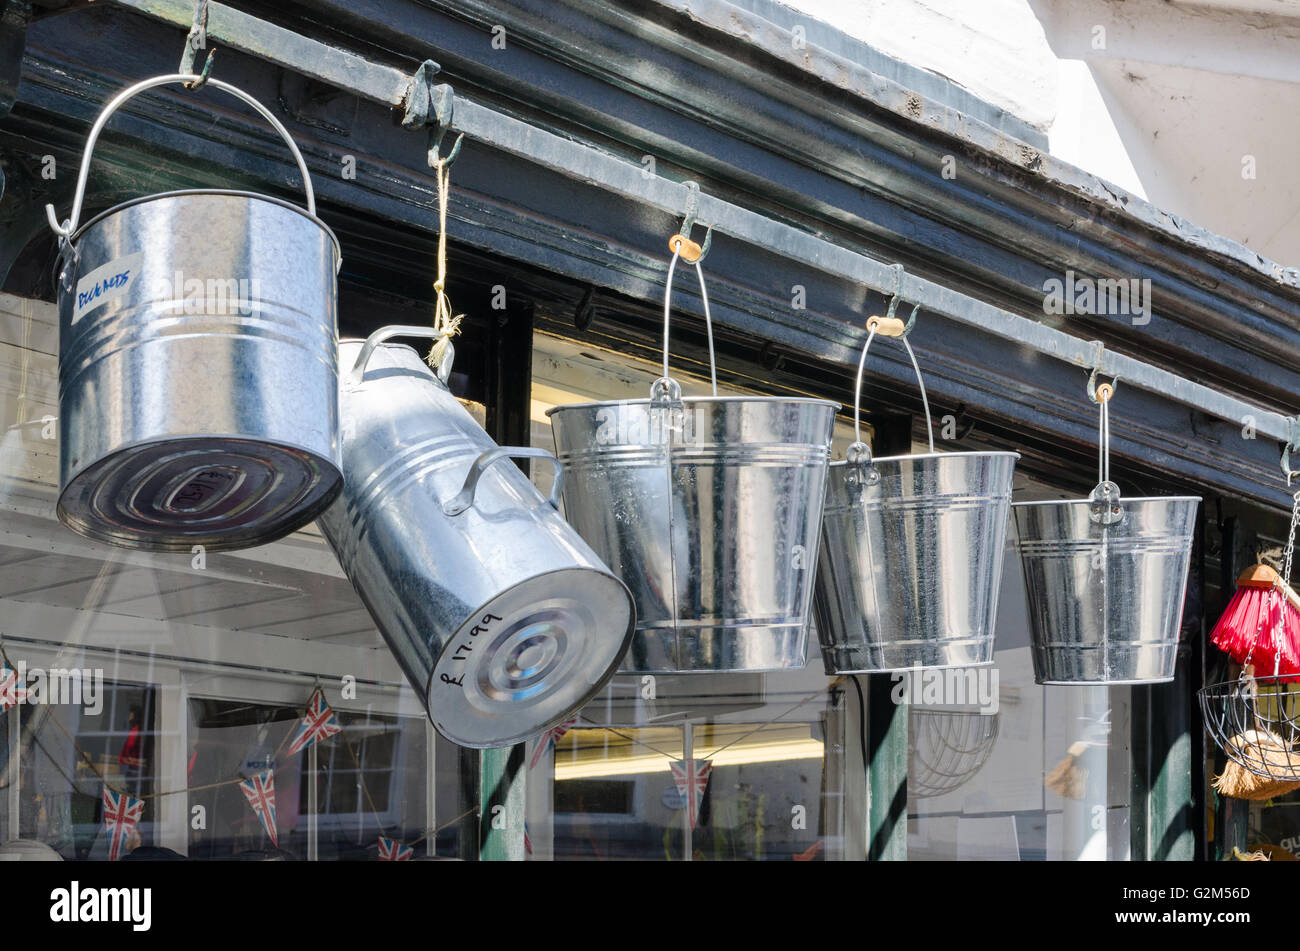 Metal buckets hanging outside a traditional hardware shop in Ludlow, Shropshire Stock Photo